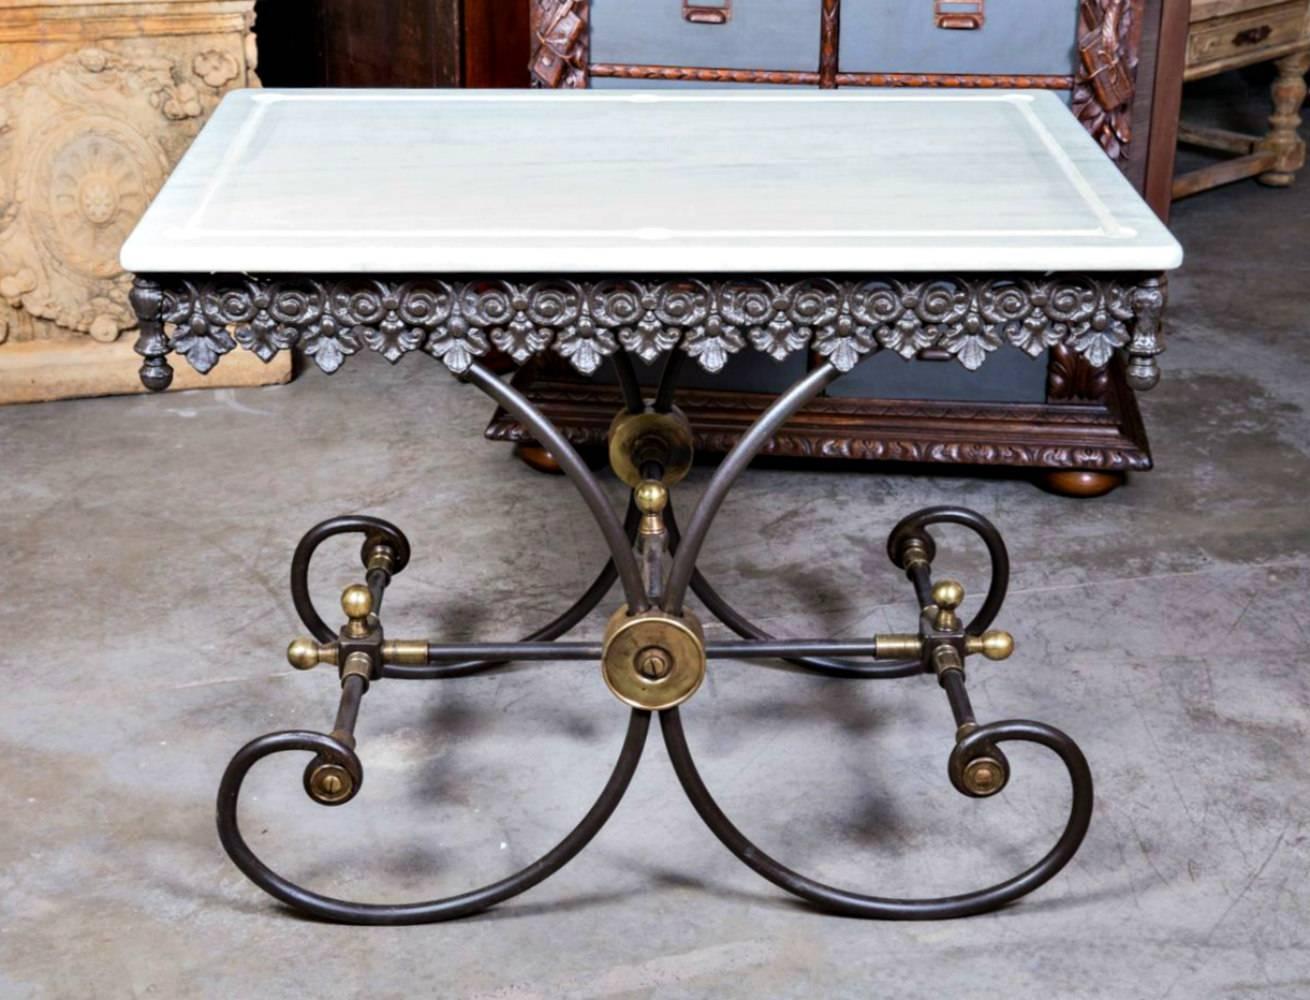 Small French pastry or butcher's table with a cast and wrought iron base featuring decorative brass elements and a marble top. Often referred to as pastry tables, the primary purpose of these beautiful tables was for use in a butcher shop. Some were